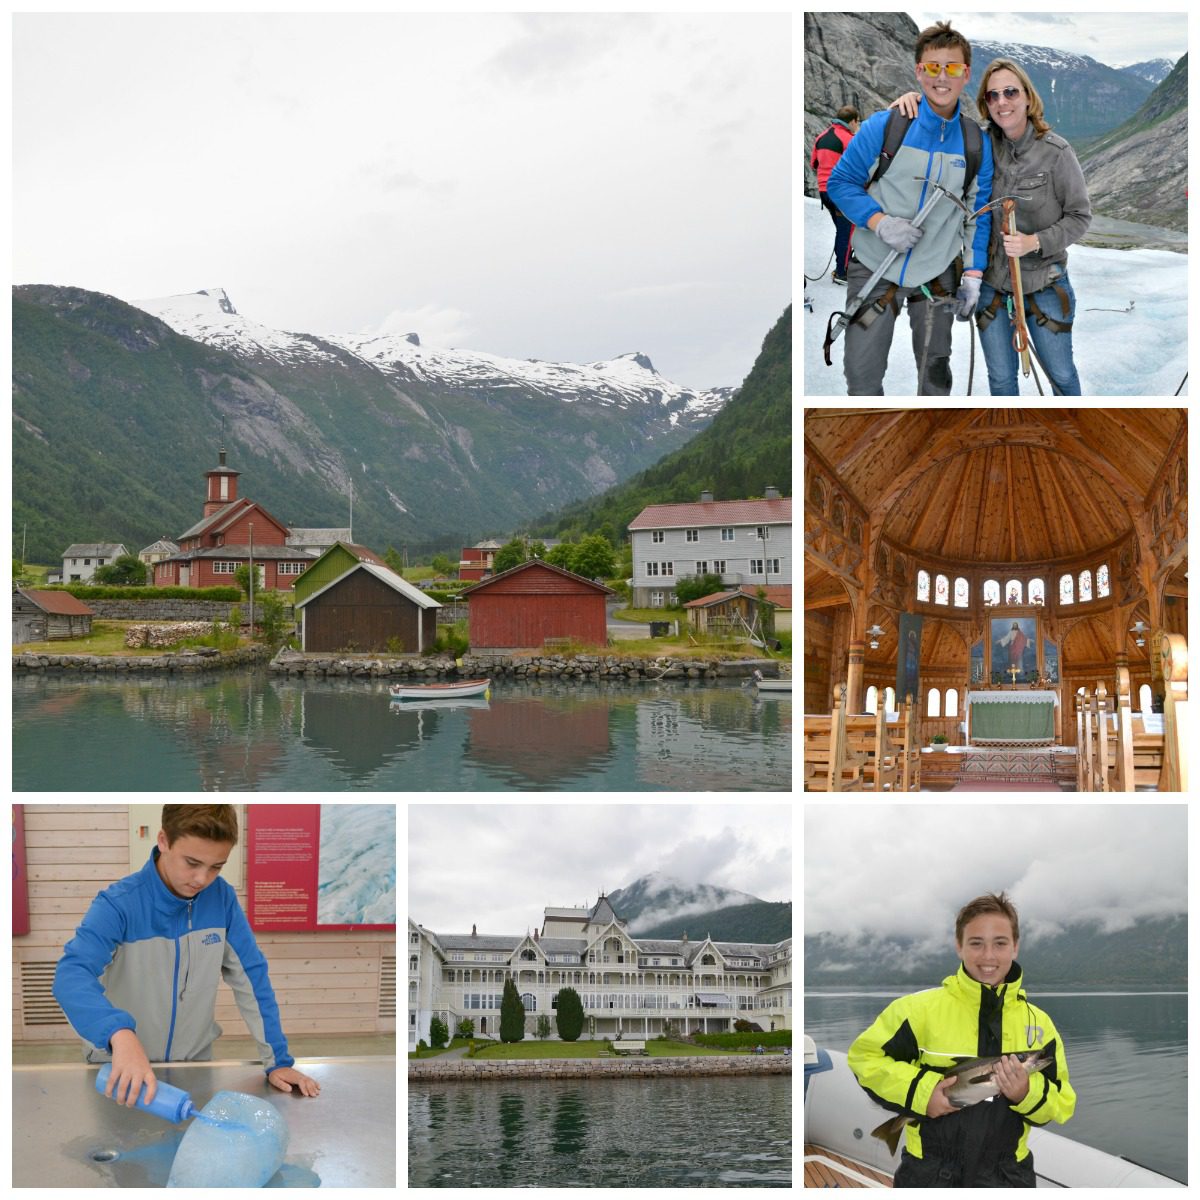 Balestrand is a good base for exploring the fjords